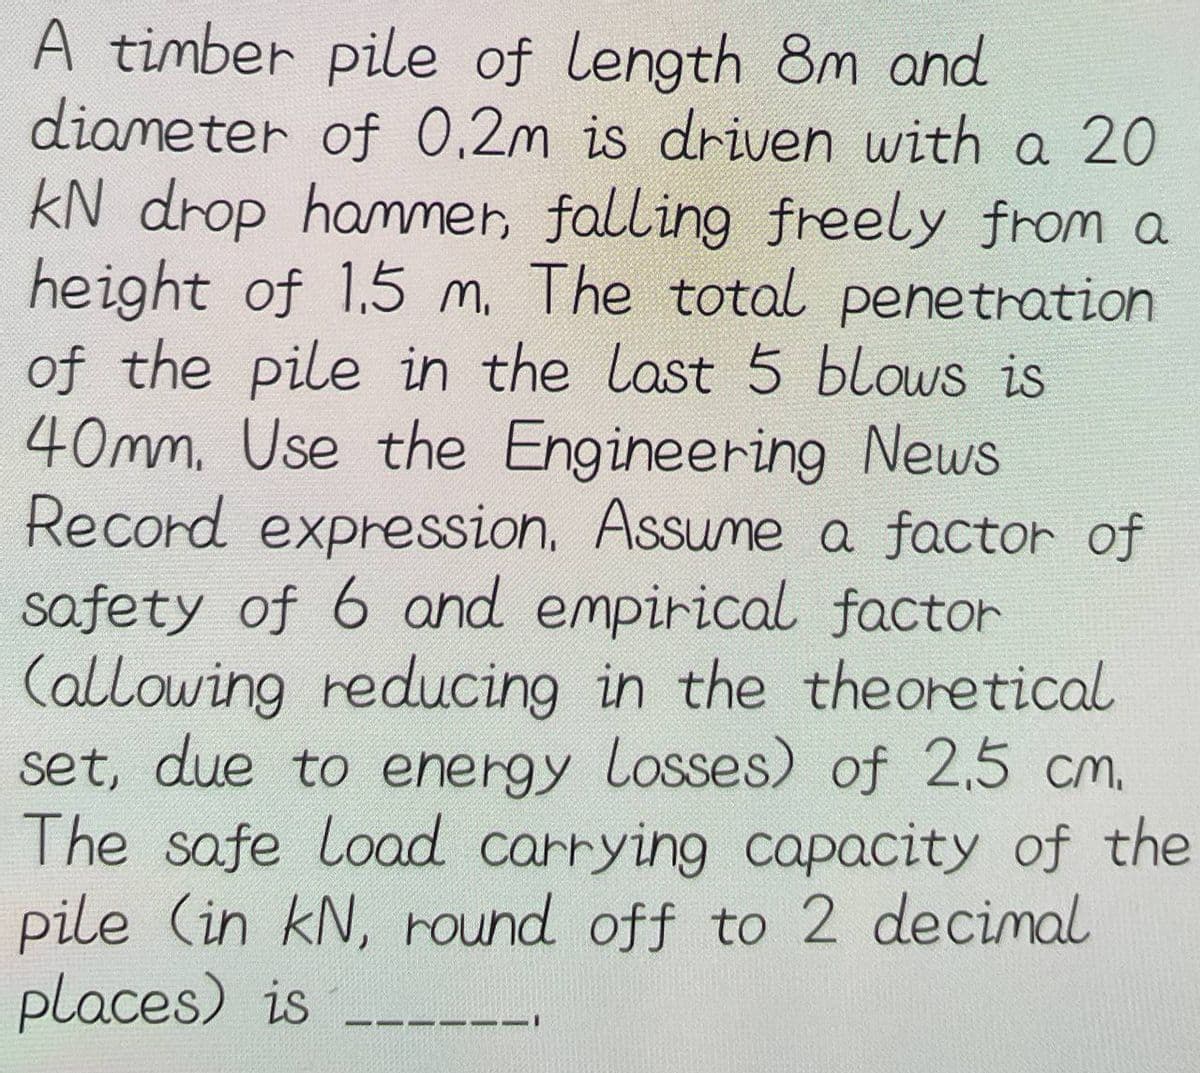 A timber pile of length 8m and
diameter of 0.2m is driven with a 20
kN drop hammer, falling freely from a
height of 1.5 m. The total penetration
of the pile in the last 5 blows is
40mm. Use the Engineering News
Record expression. Assume a factor of
safety of 6 and empirical factor
(allowing reducing in the theoretical
set, due to energy Losses) of 2,5 cm.
The safe Load carrying capacity of the
pile (in kN, round off to 2 decimal
places) is